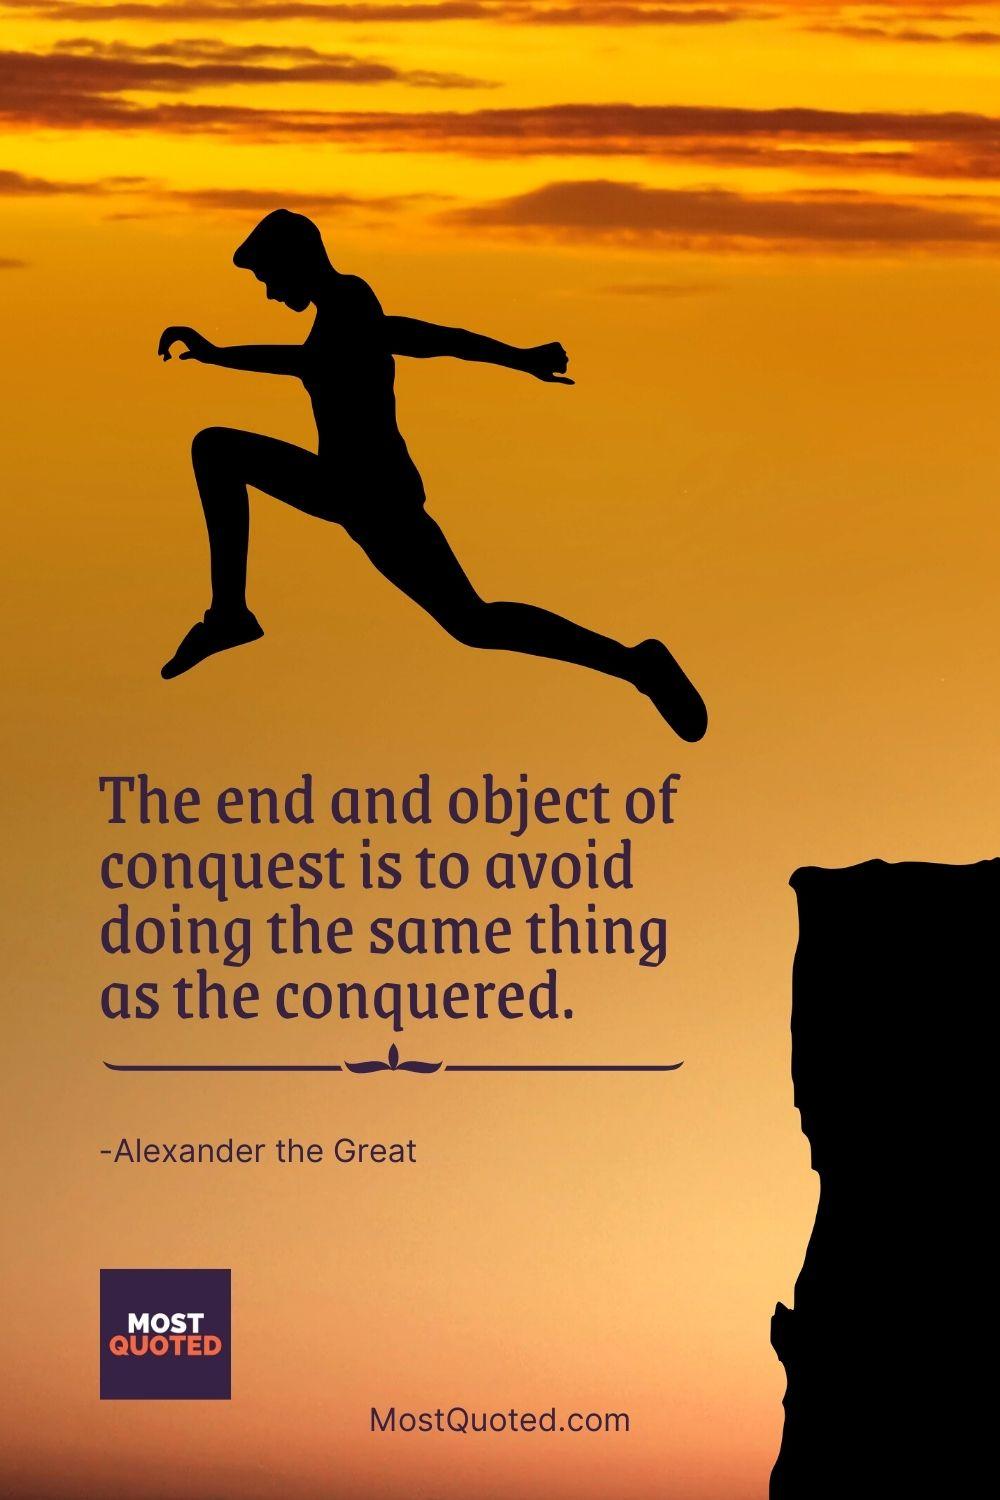 The end and object of conquest is to avoid doing the same thing as the conquered. - Alexander the Great